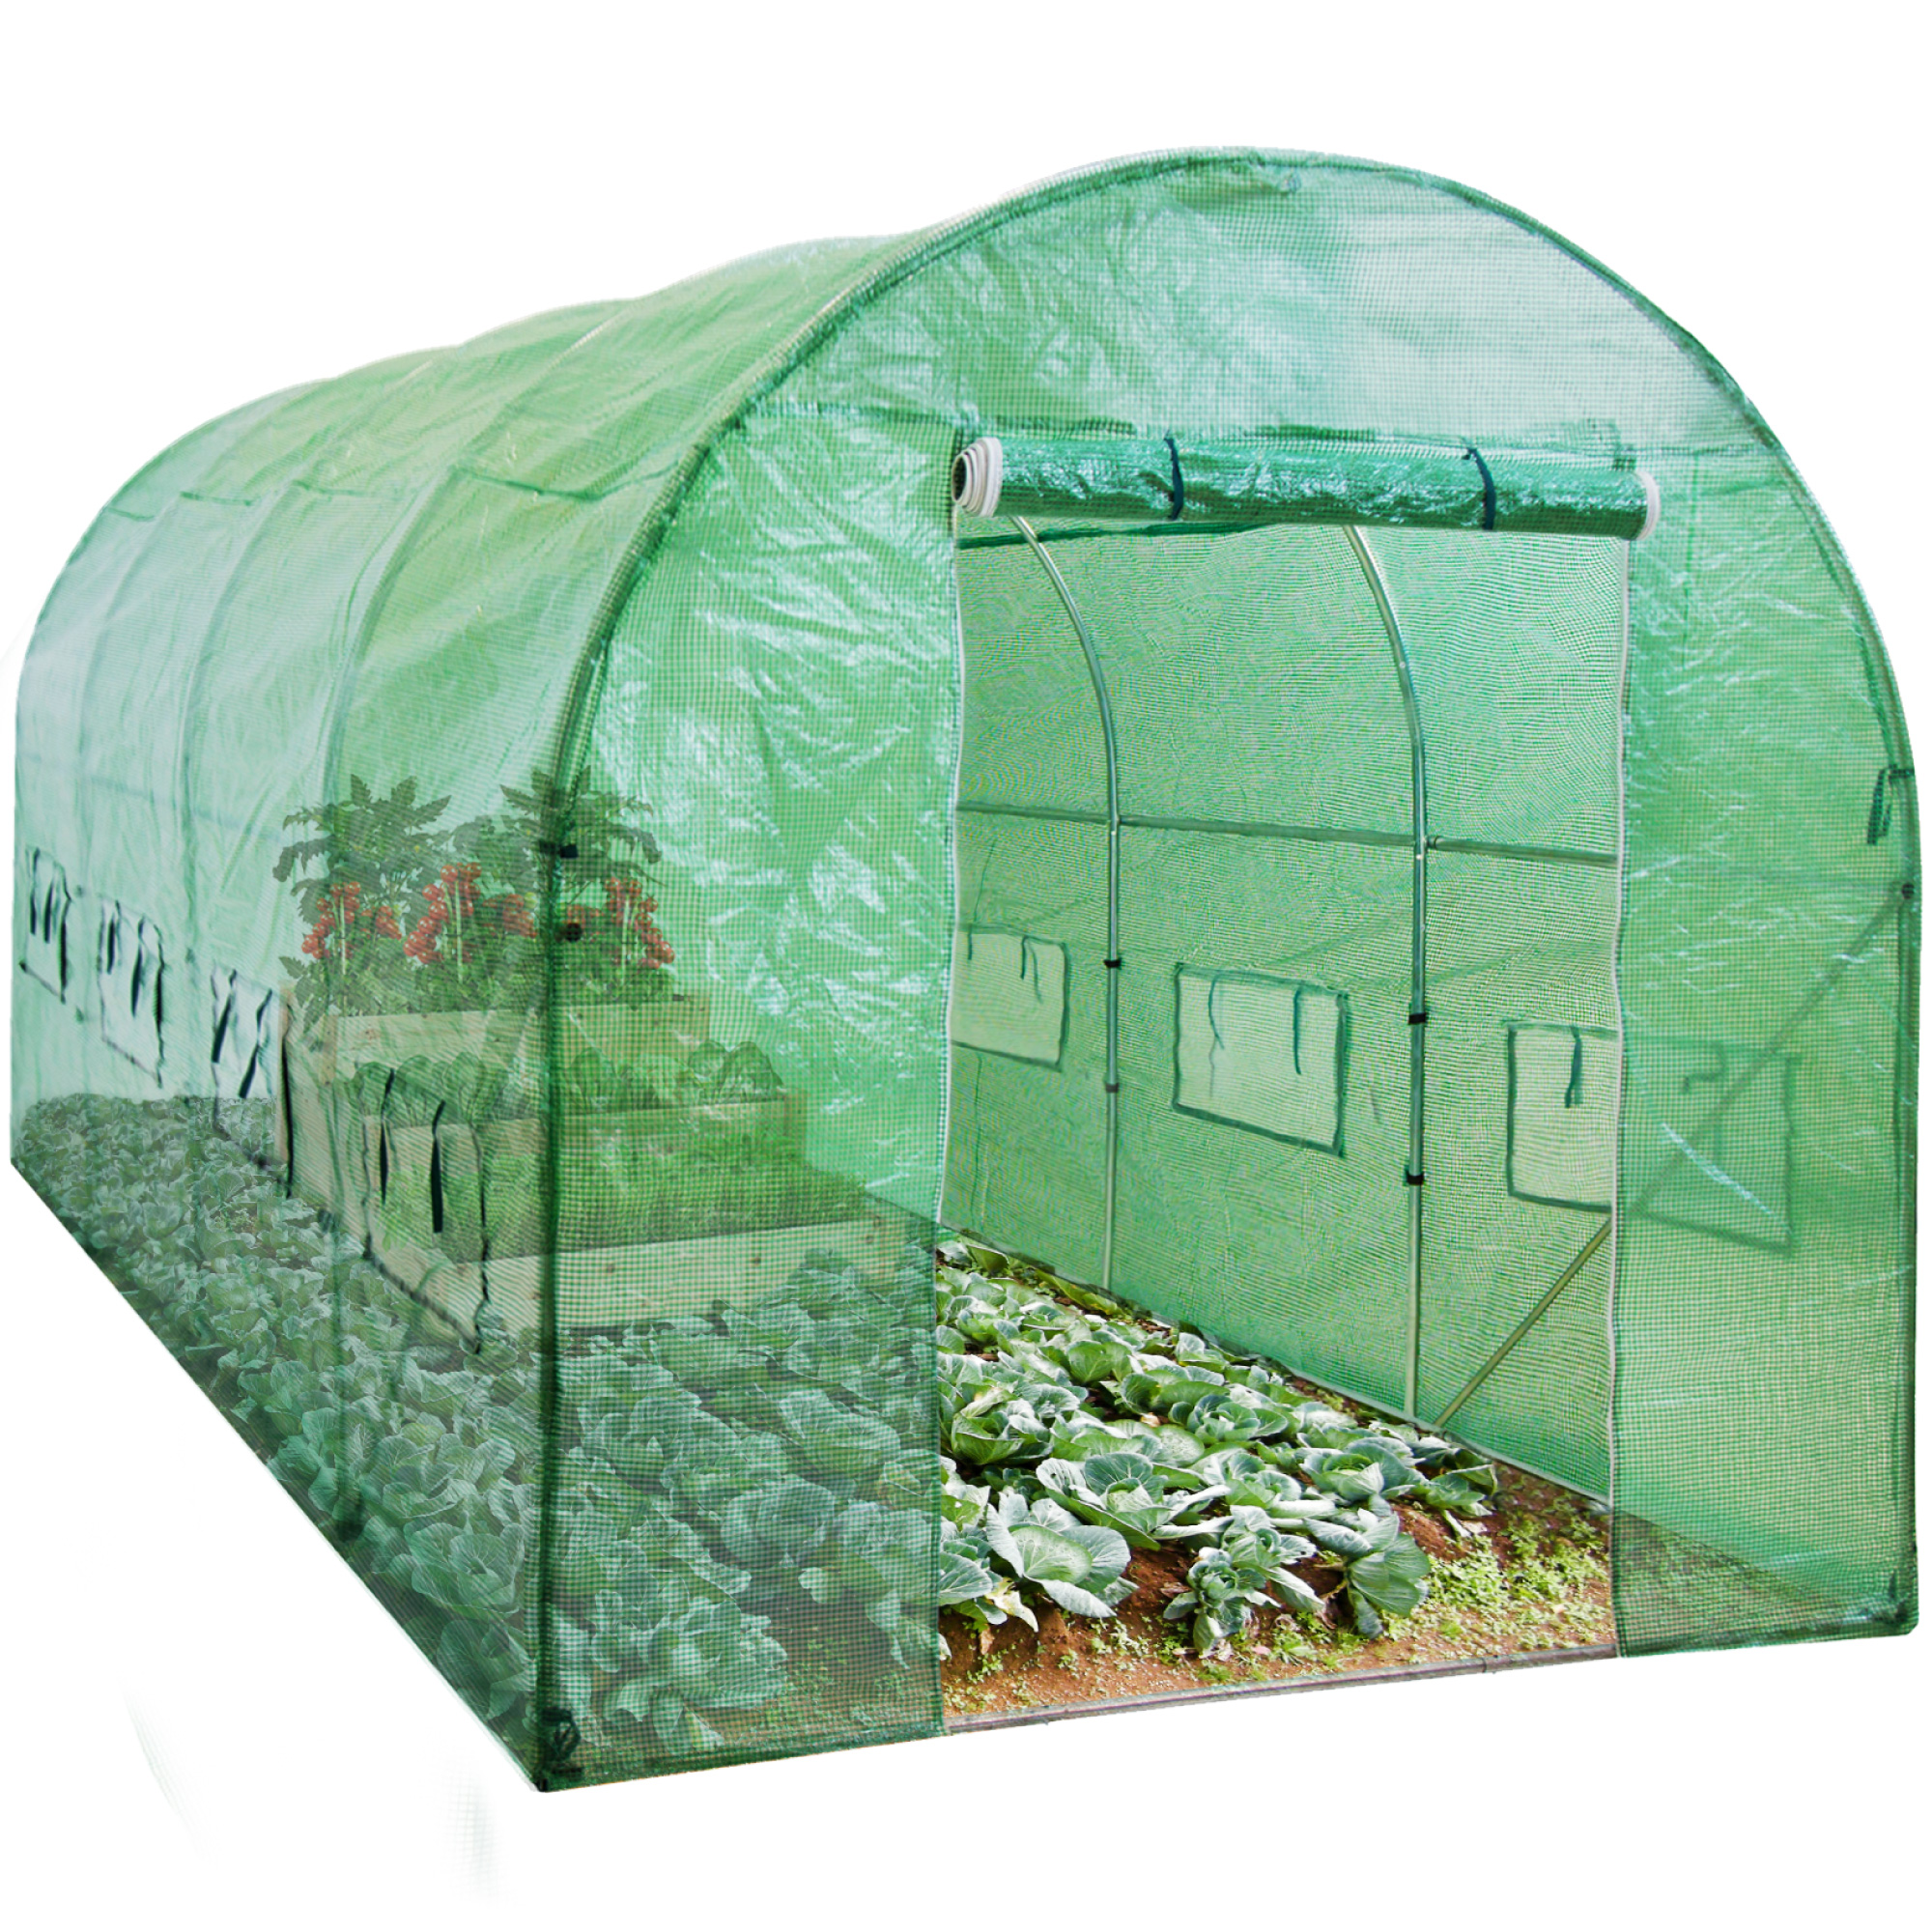 Best Choice Products 15x7x7ft Walk-In Greenhouse Tunnel, Garden Accessory Tent w/ 8 Roll-Up Windows, Zippered Door - image 1 of 6